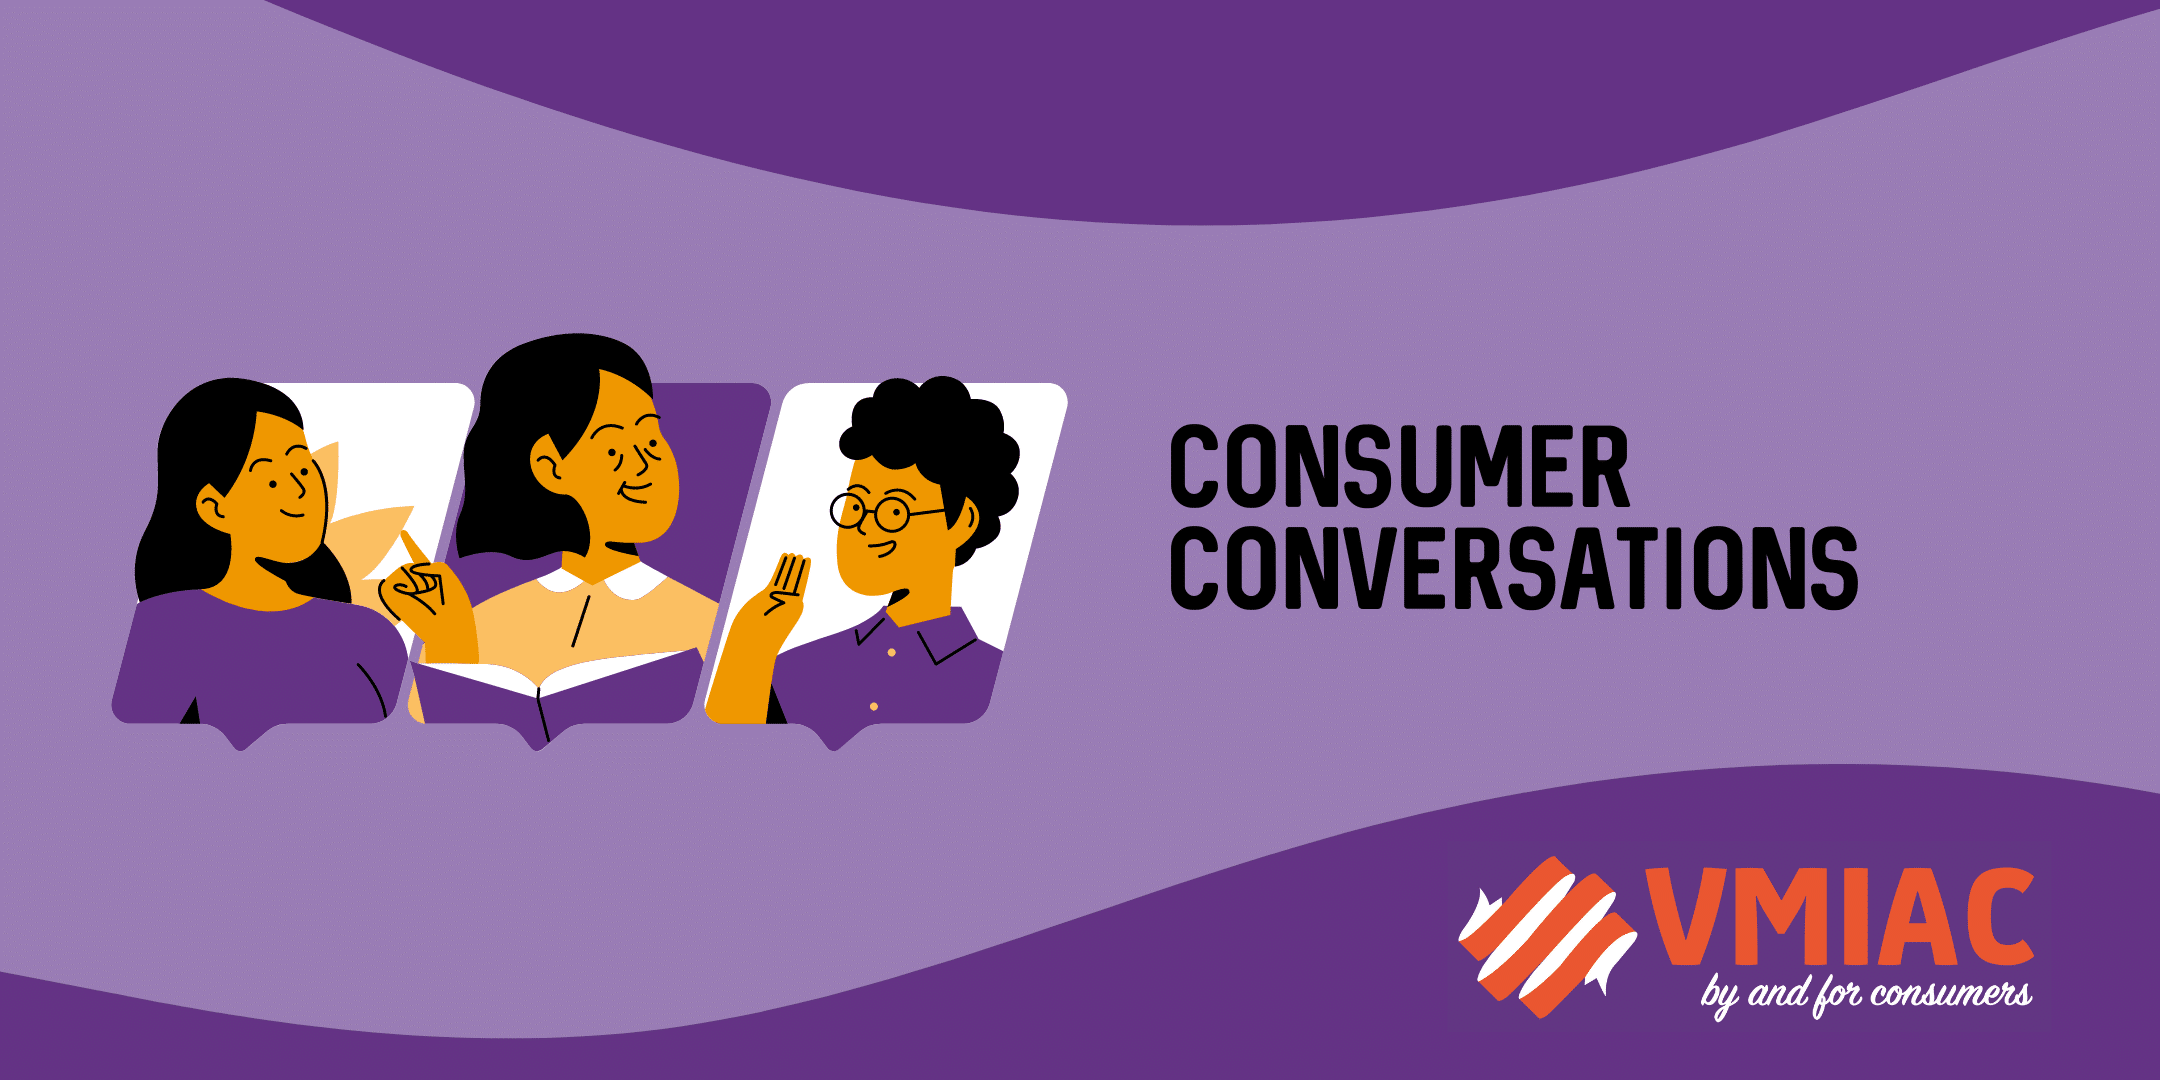 Banner showing caricatures of people talking with one another with the words "Consumer Conversations" in the foreground and the VMIAC logo against a deep purple background